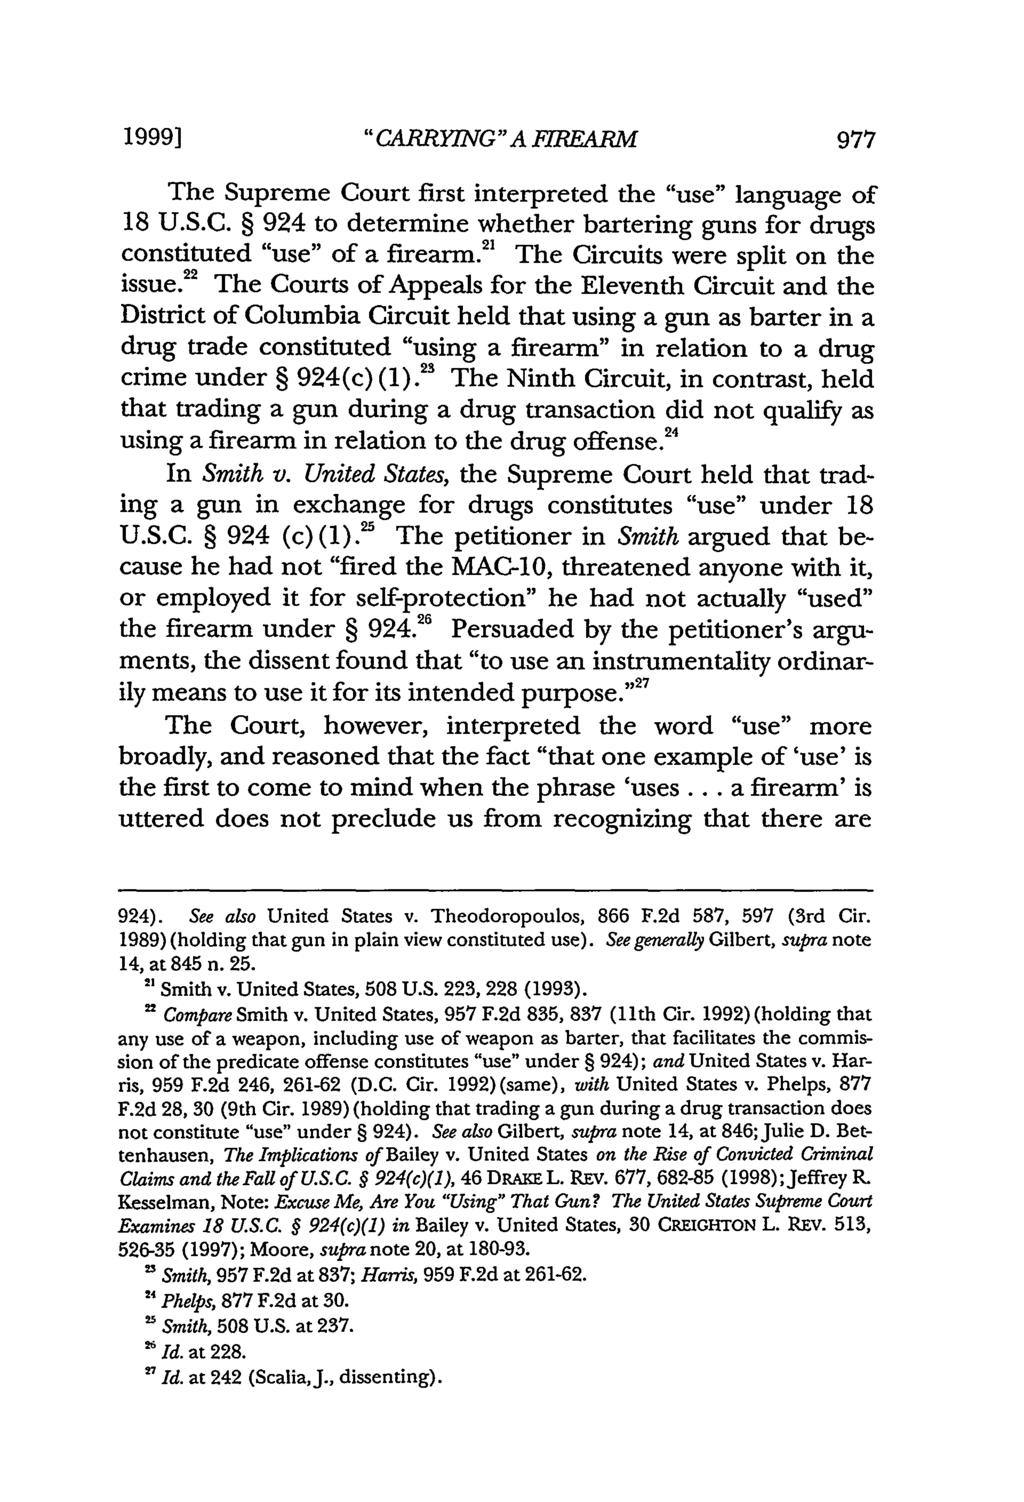 1999] "CARRY!NG" A ETREARM The Supreme Court first interpreted the "use" language of 18 U.S.C. 924 to determine whether bartering guns for drugs constituted "use" of a firearm.